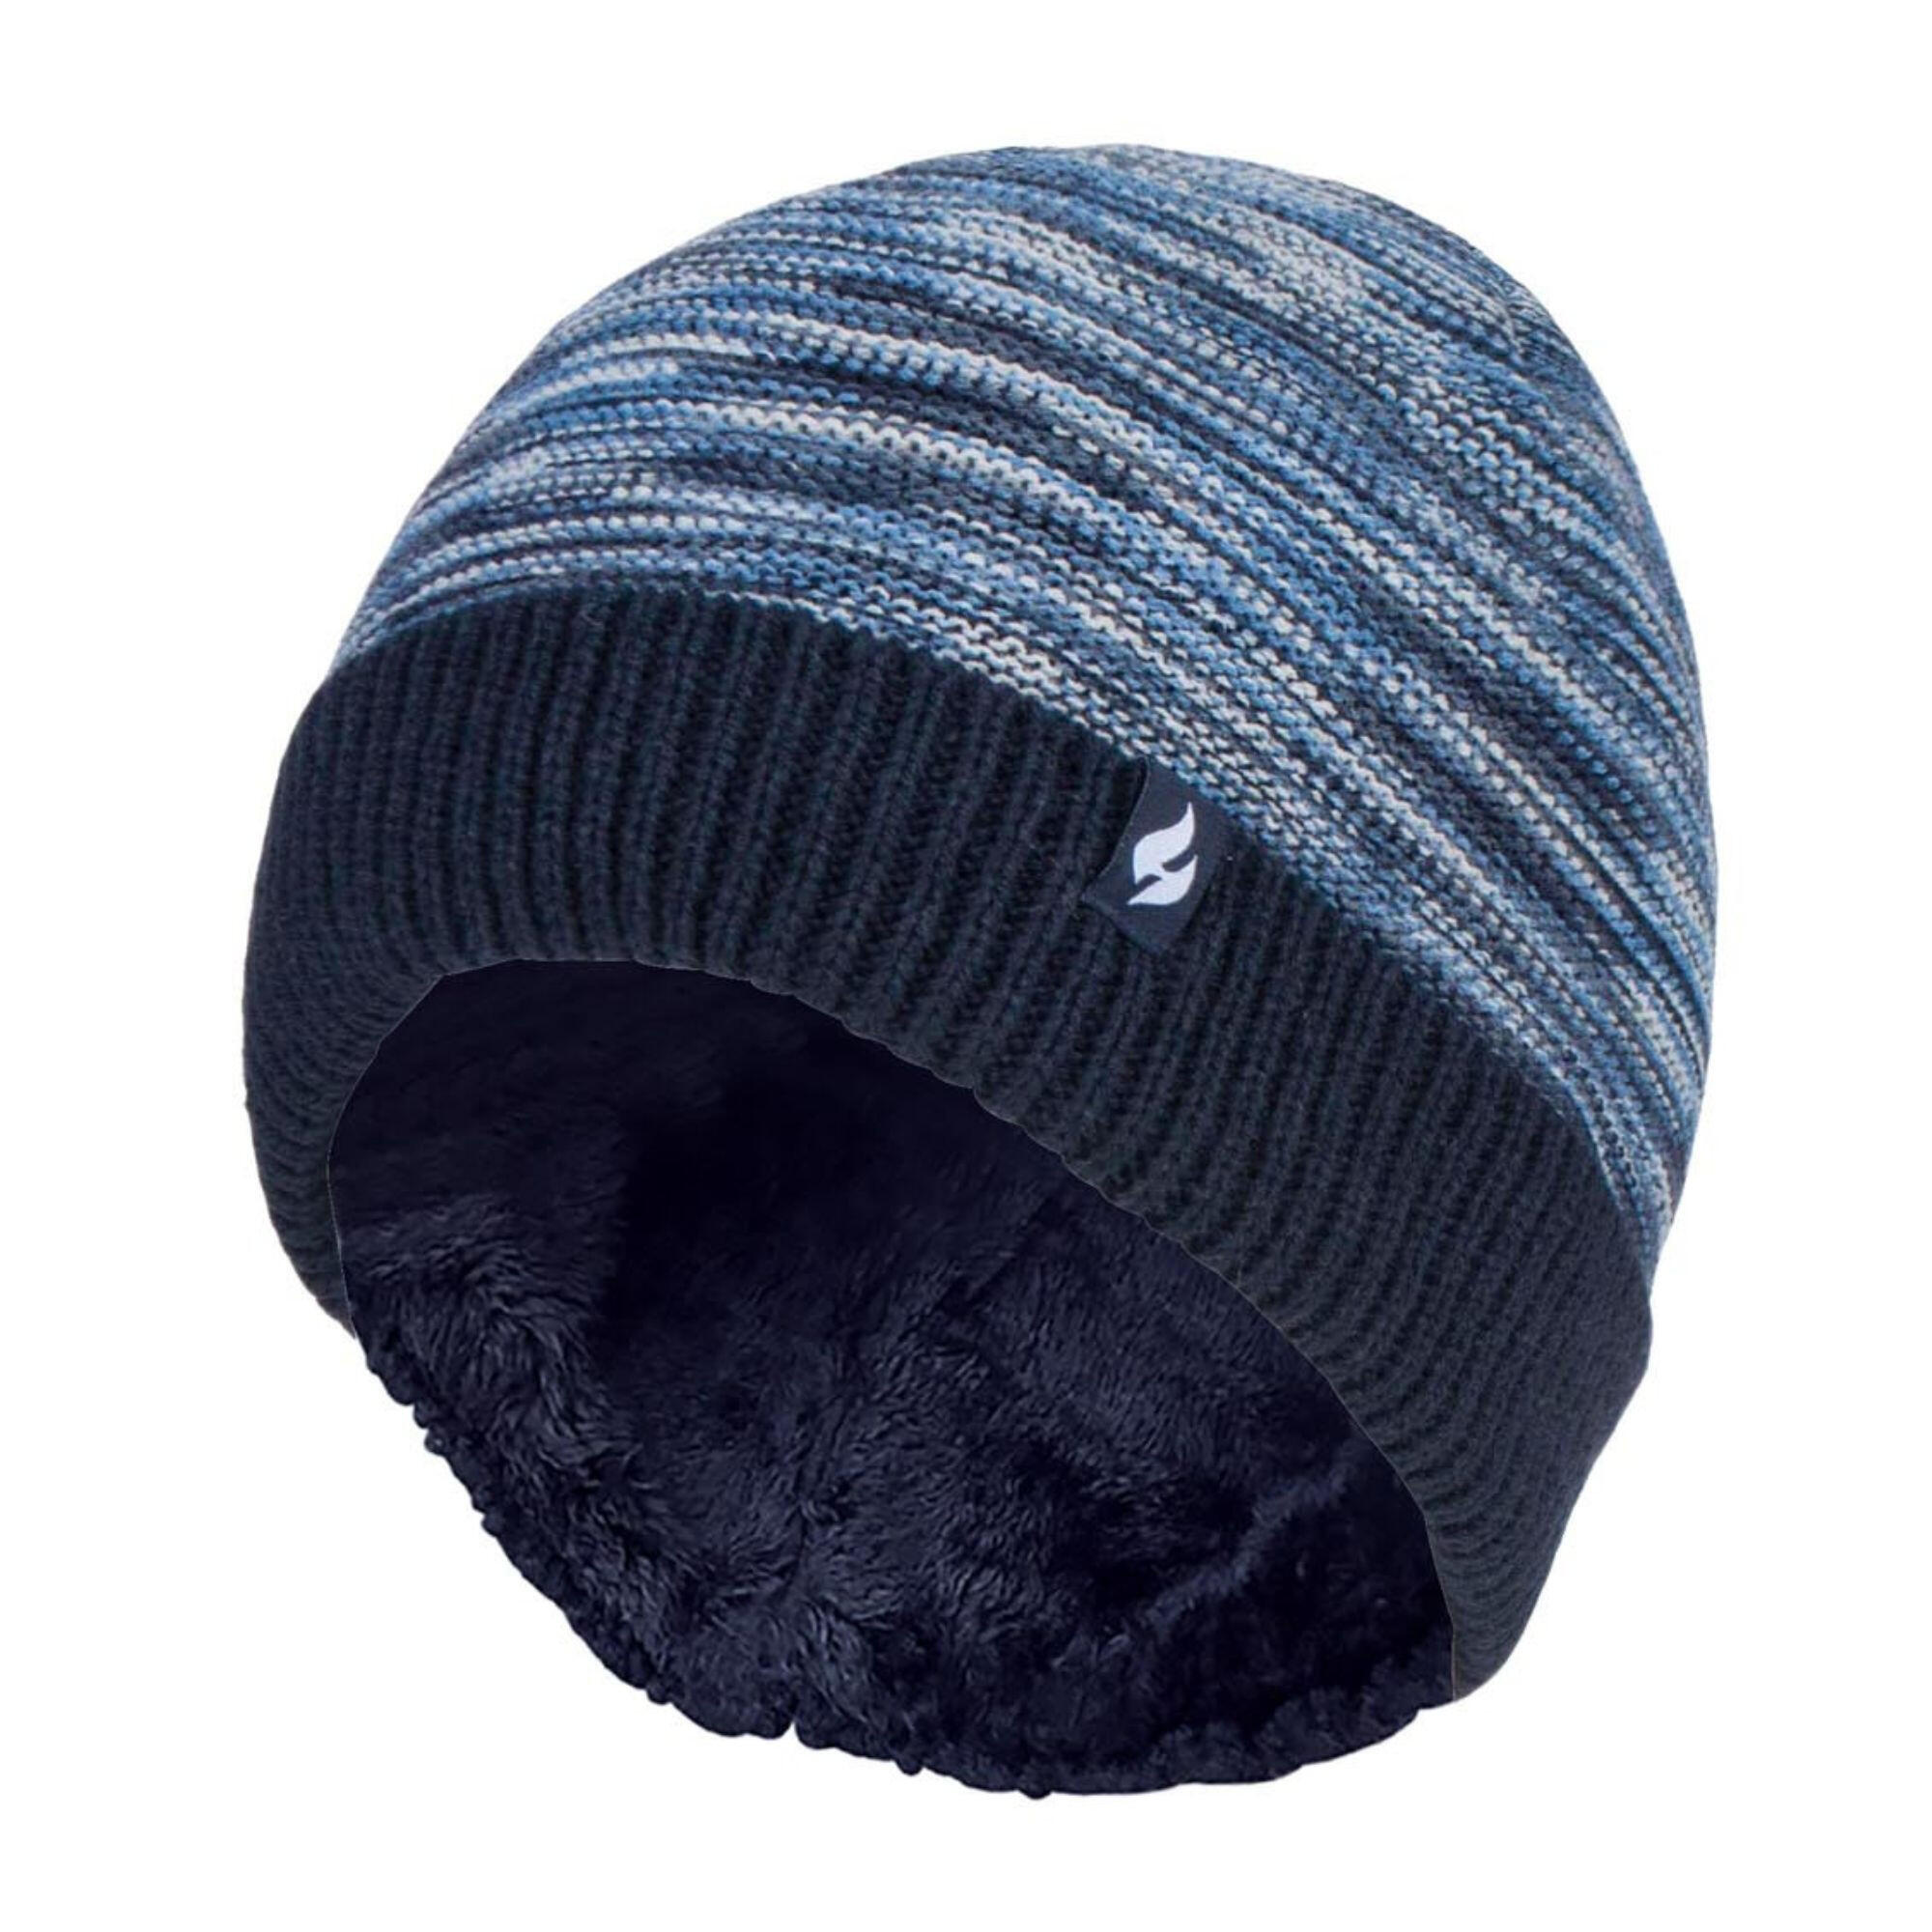 HEAT HOLDERS Mens Thermal Knitted Beanie Hat for Winter